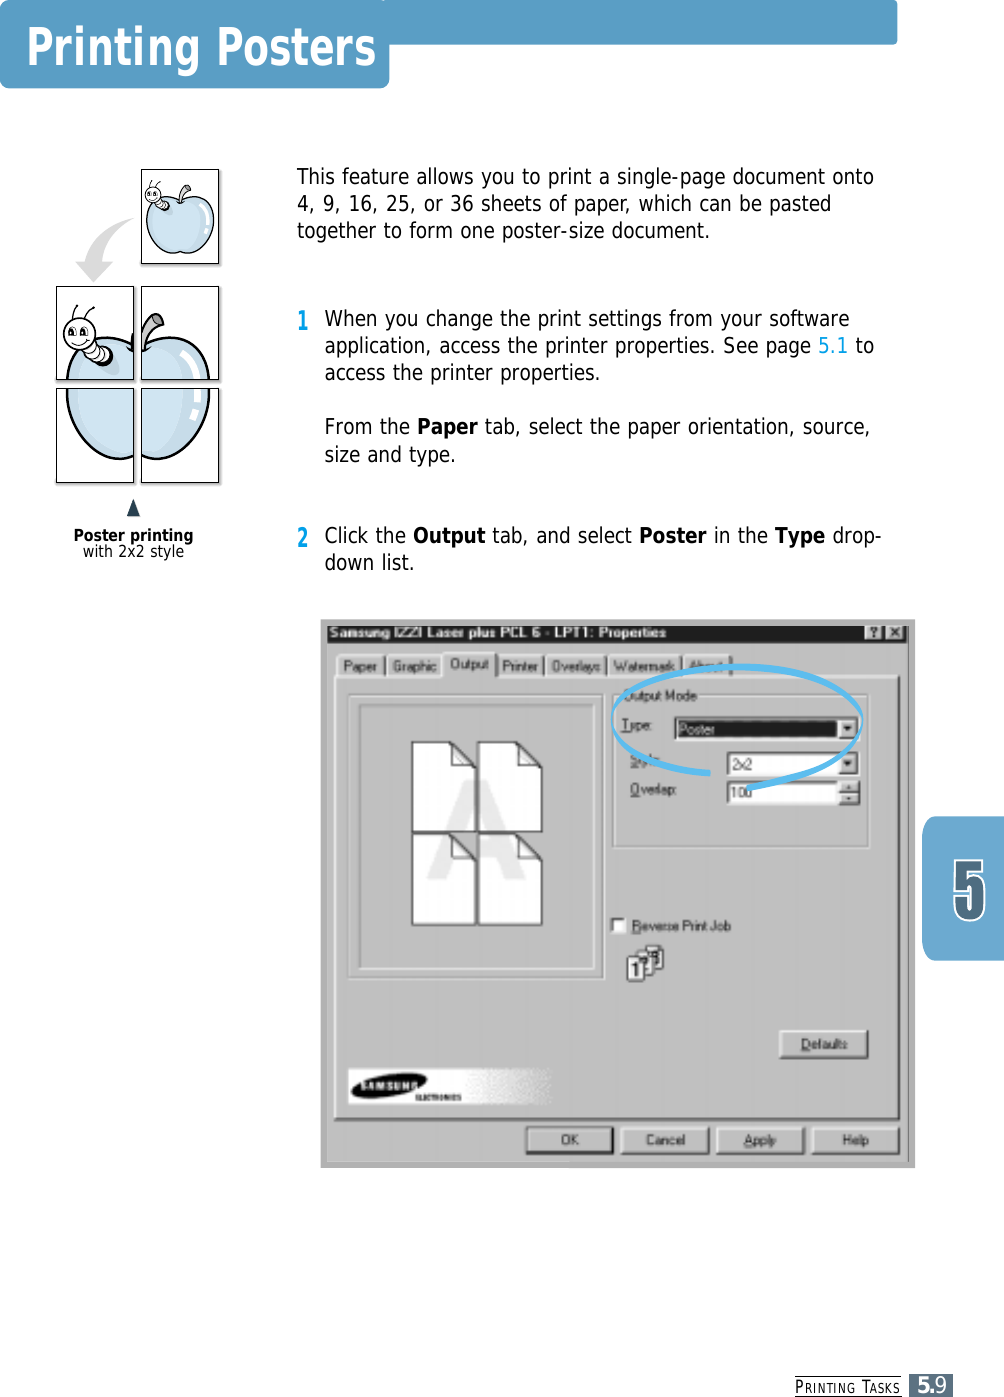 PRINTING TASKS5.9Printing PostersThis feature allows you to print a single-page document onto4, 9, 16, 25, or 36 sheets of paper, which can be pastedtogether to form one poster-size document.1When you change the print settings from your softwareapplication, access the printer properties. See page 5.1 toaccess the printer properties.From the Paper tab, select the paper orientation, source,size and type.2Click the Output tab, and select Poster in the Type drop-down list.&quot;&quot;Poster printingwith 2x2 style